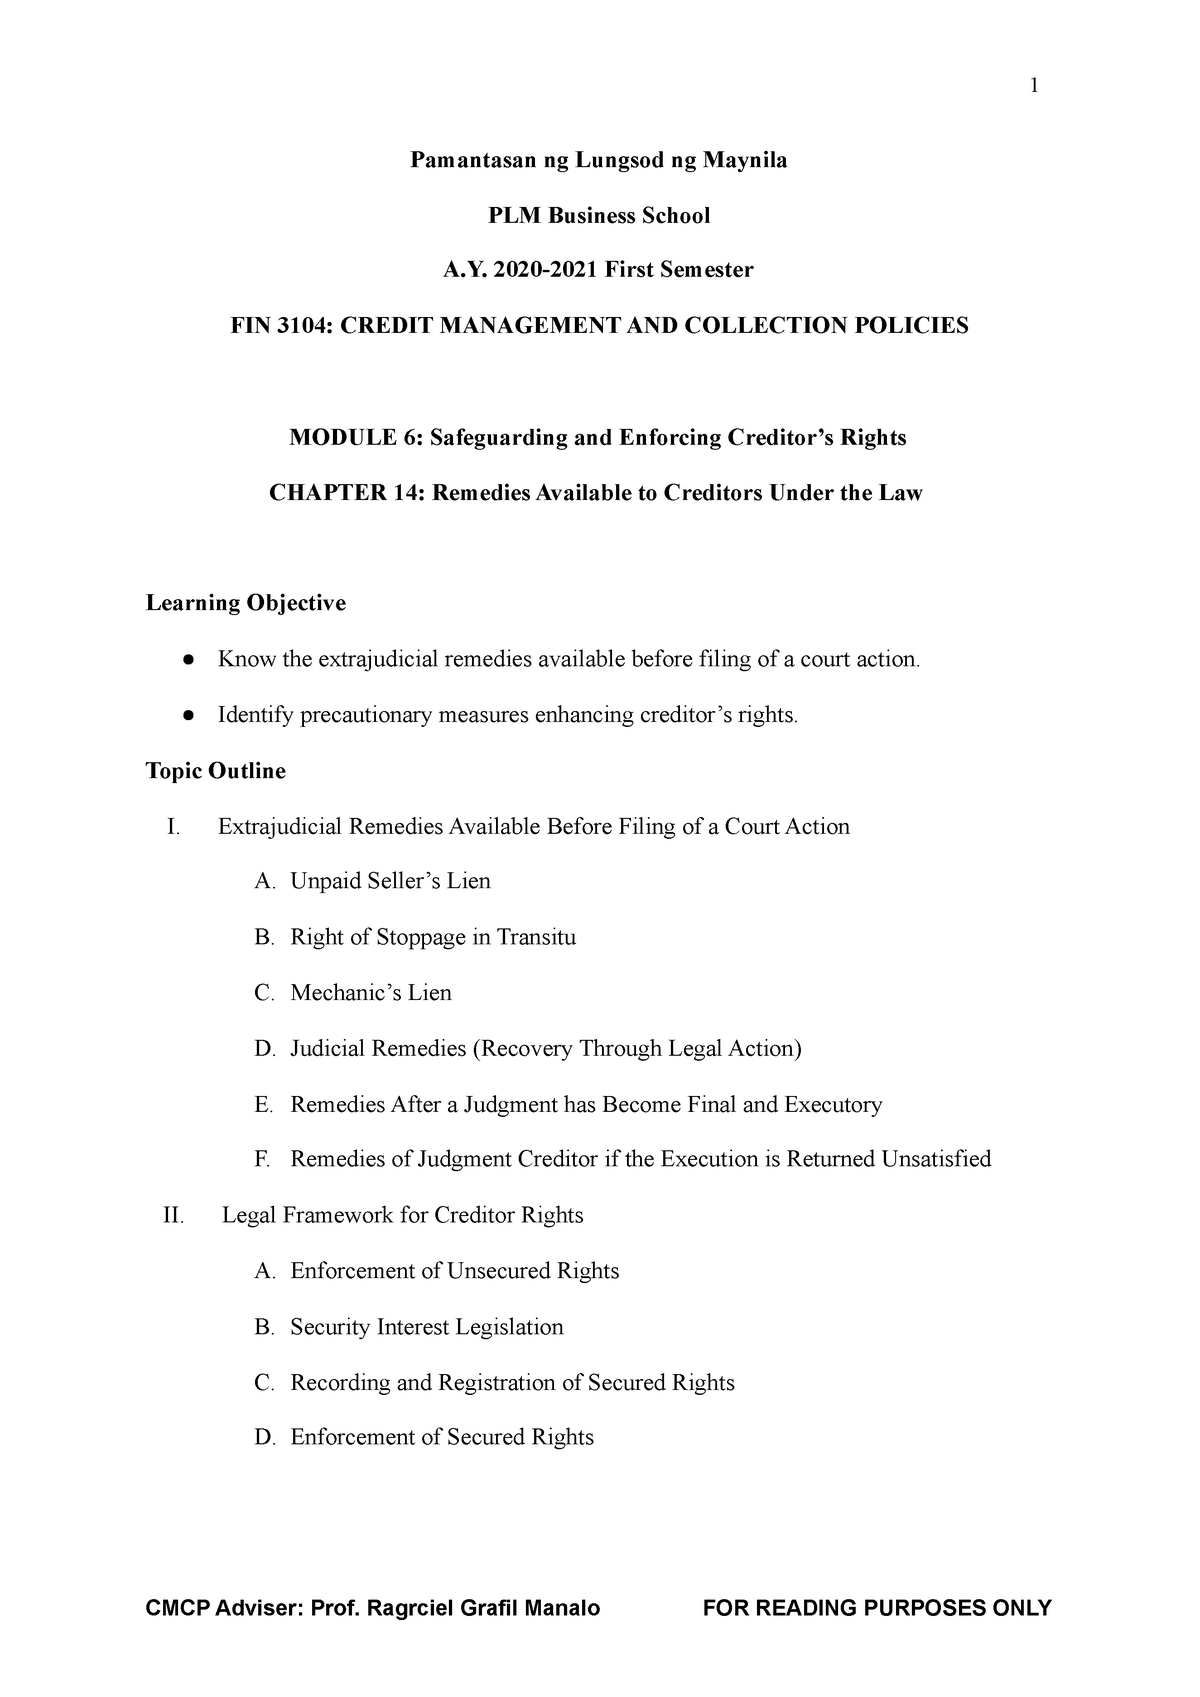 CMCP M6 CH 14Remedies Available to Creditors Under the Lawconverted